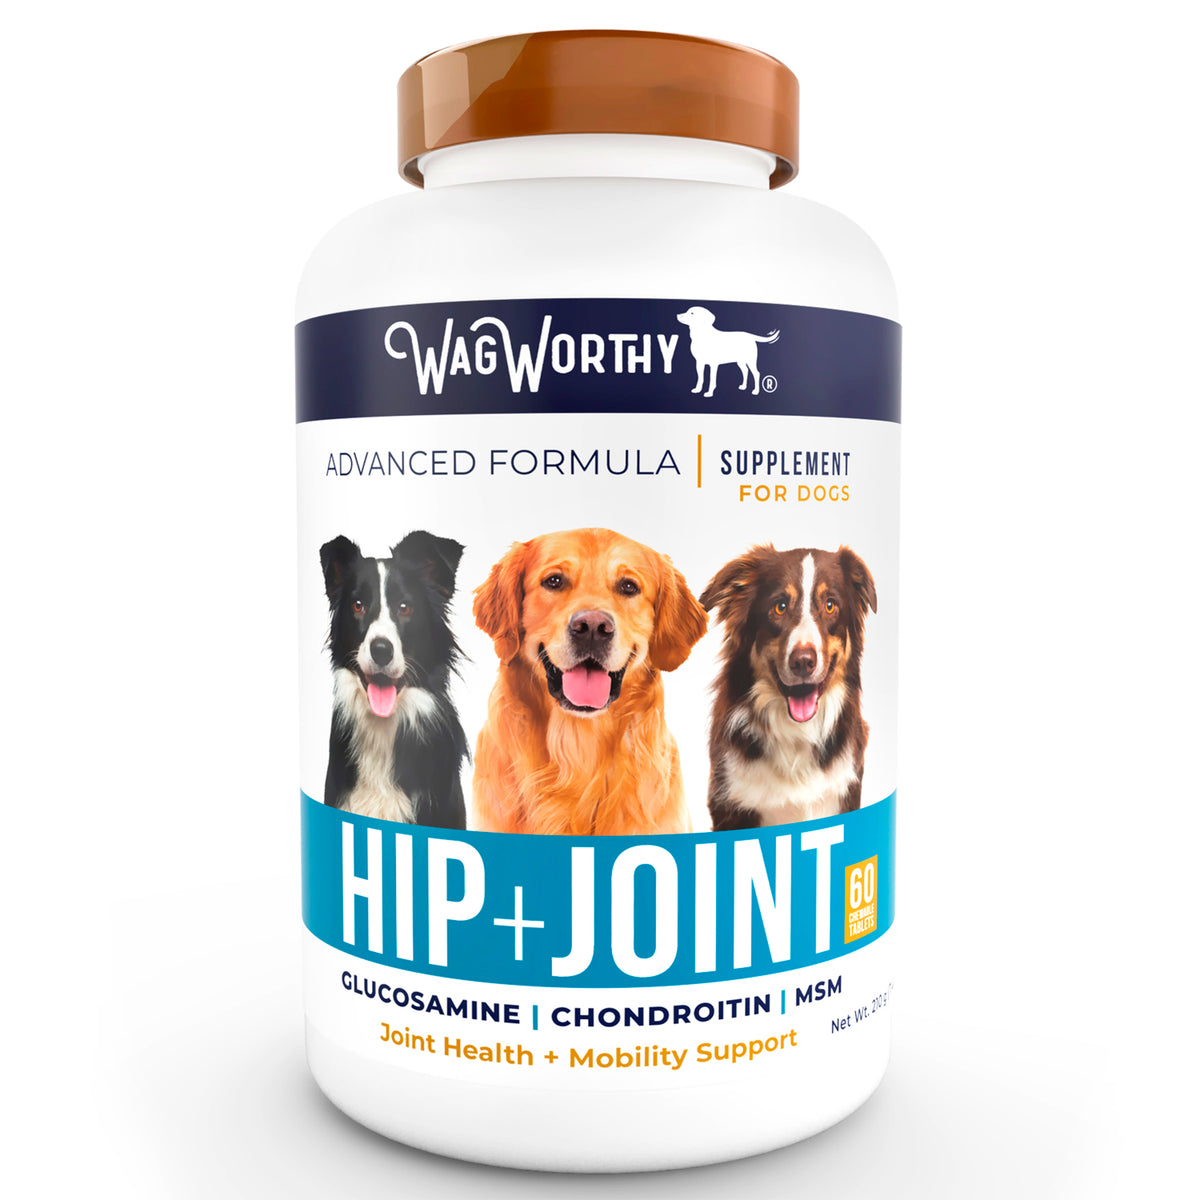 60-count bottle of WagWorthy Hip + Joint glucosamine, chondroitin, and MSM joint supplement for dogs